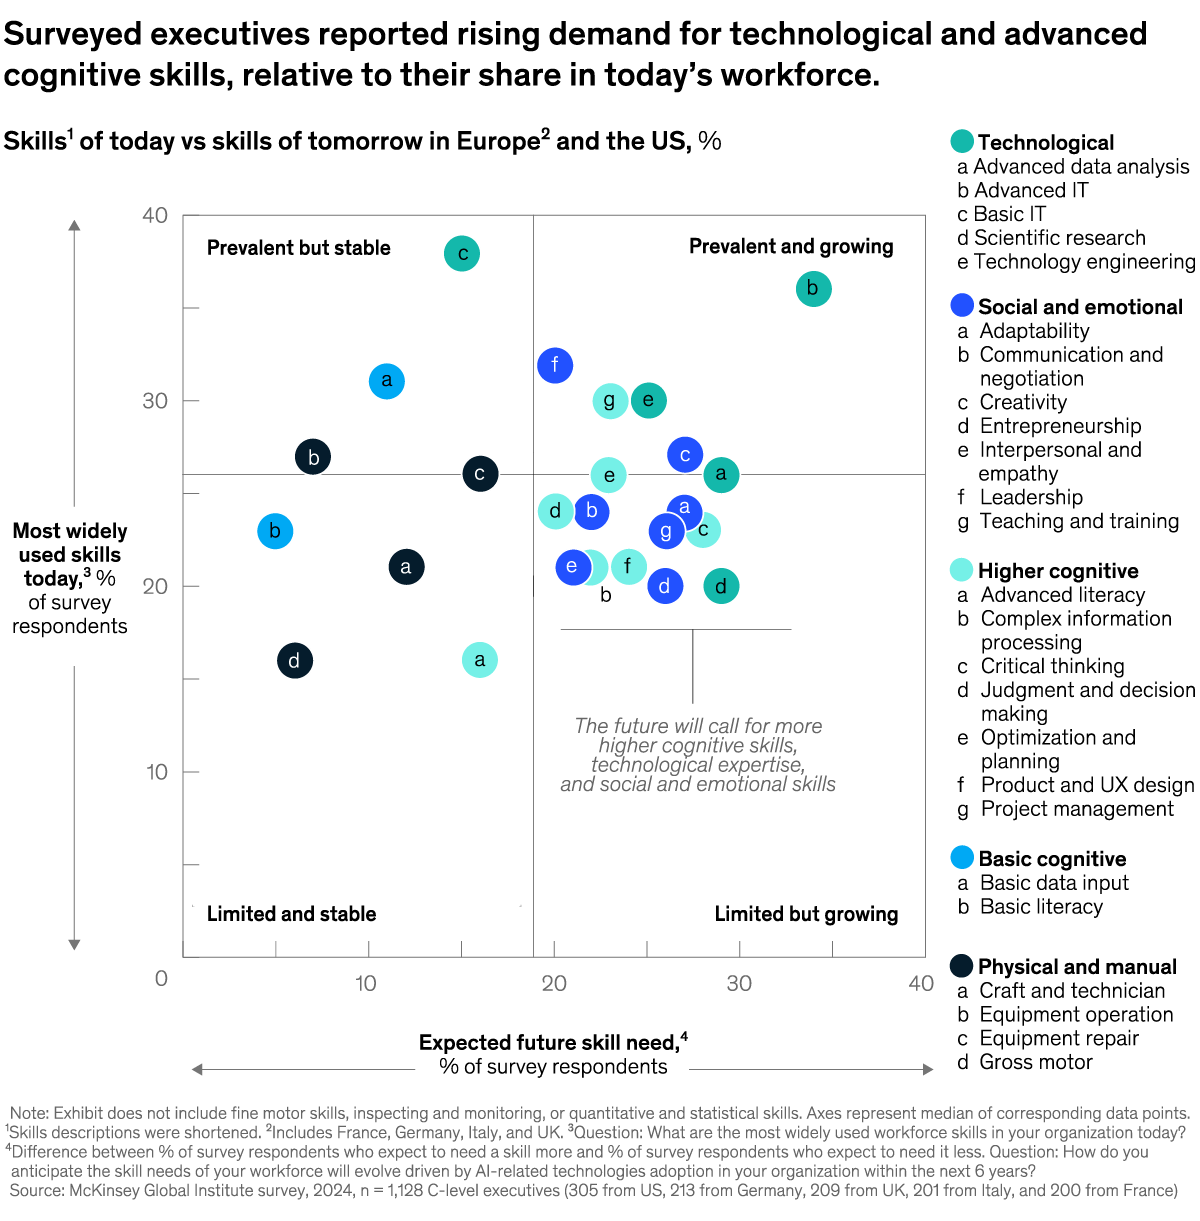 A chart titled “Surveyed executives reported rising demand for technological and advanced cognitive skills, relative to their share in today's workforce.” Click to open the full article on McKinsey.com.